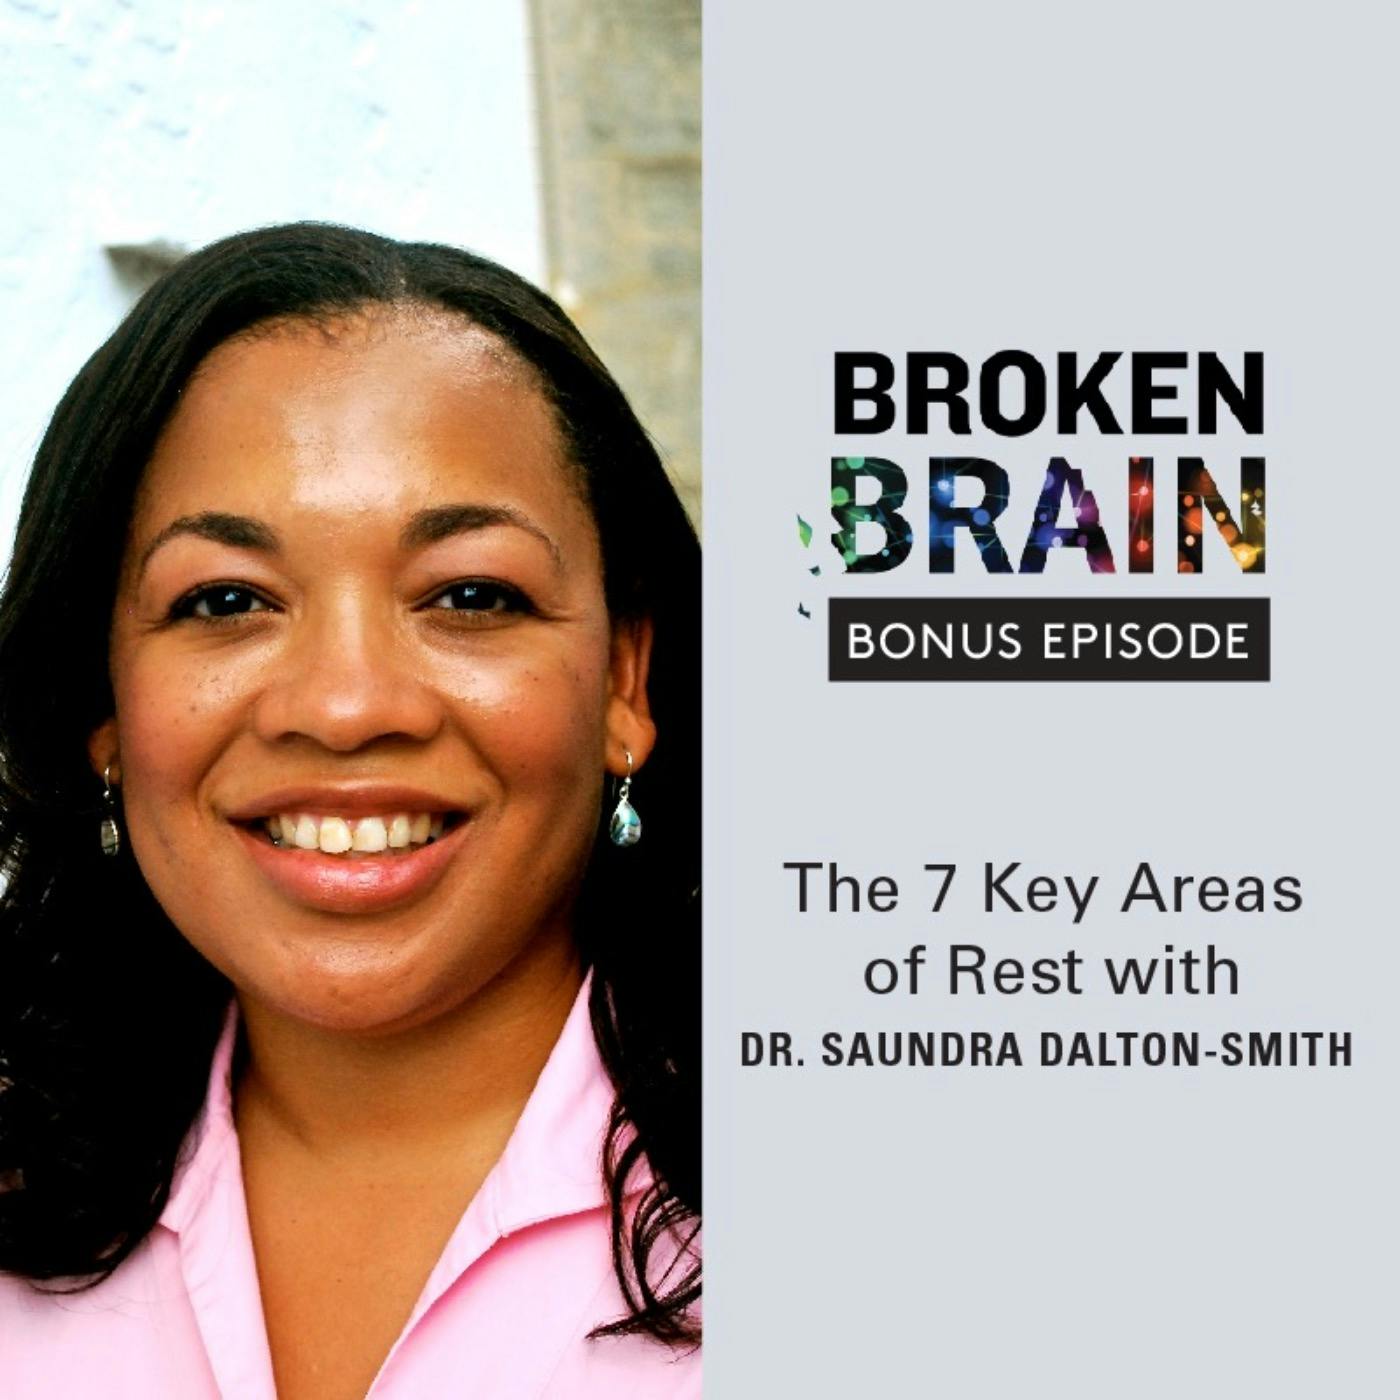 The 7 Key Areas of Rest with Dr. Saundra Dalton-Smith